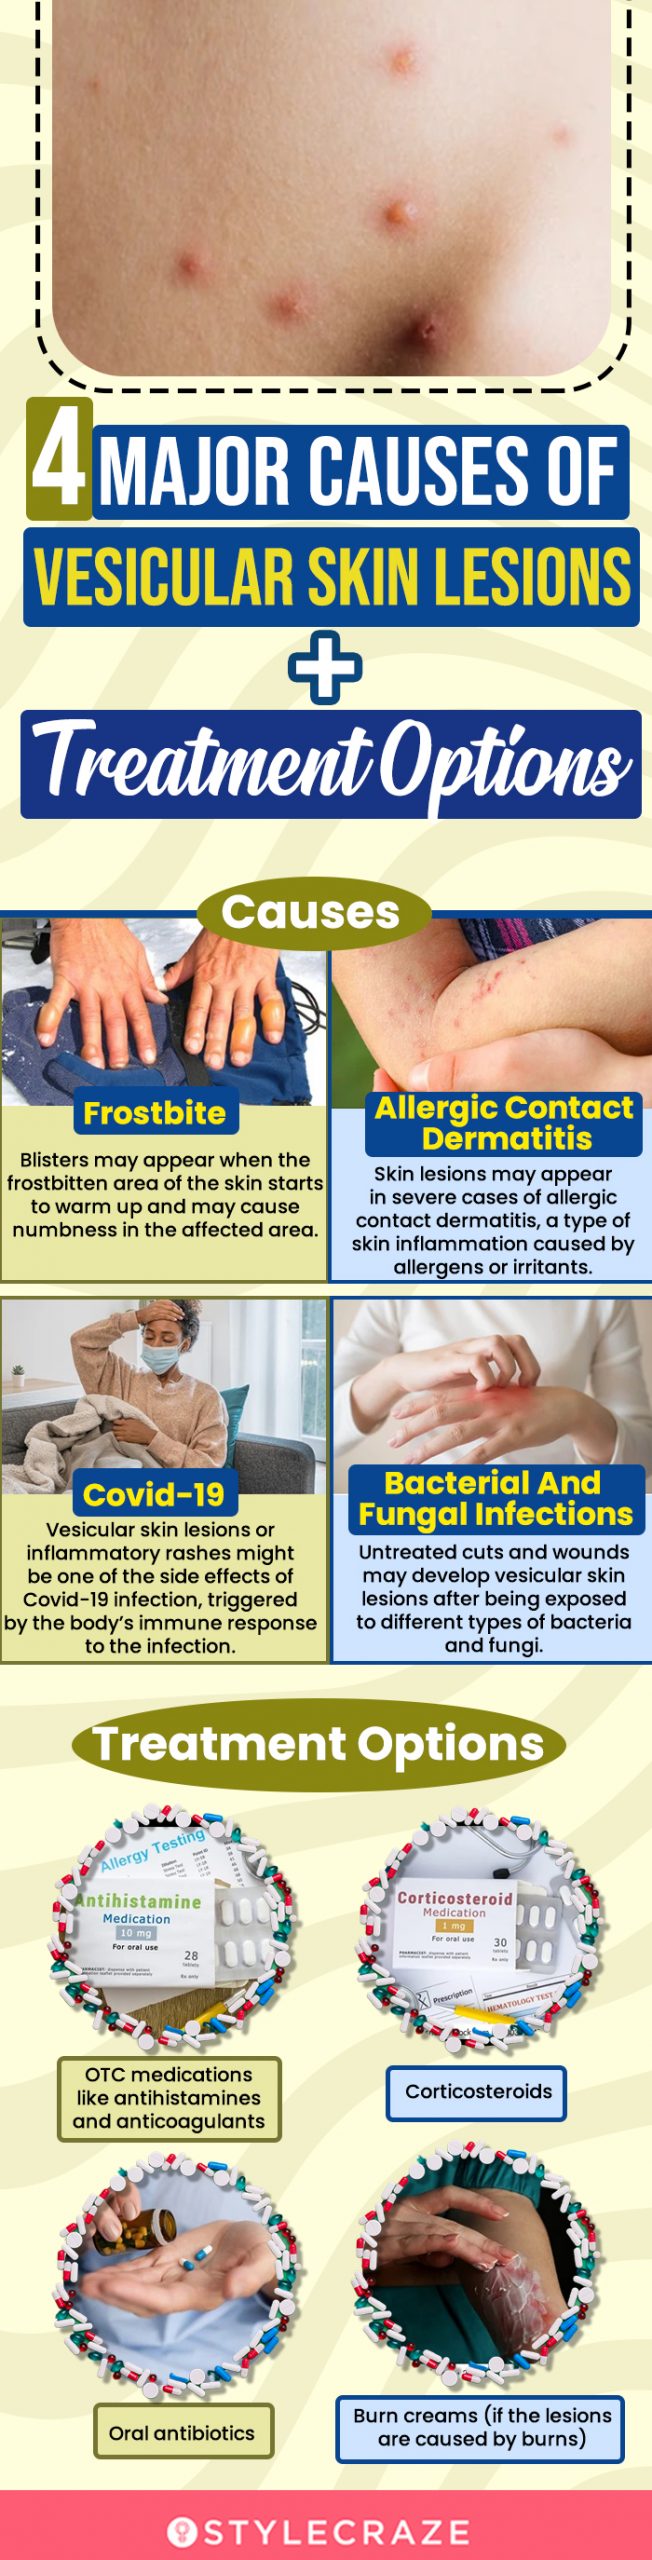 4 major causes of vesicular skin lesions + treatment options (infographic)